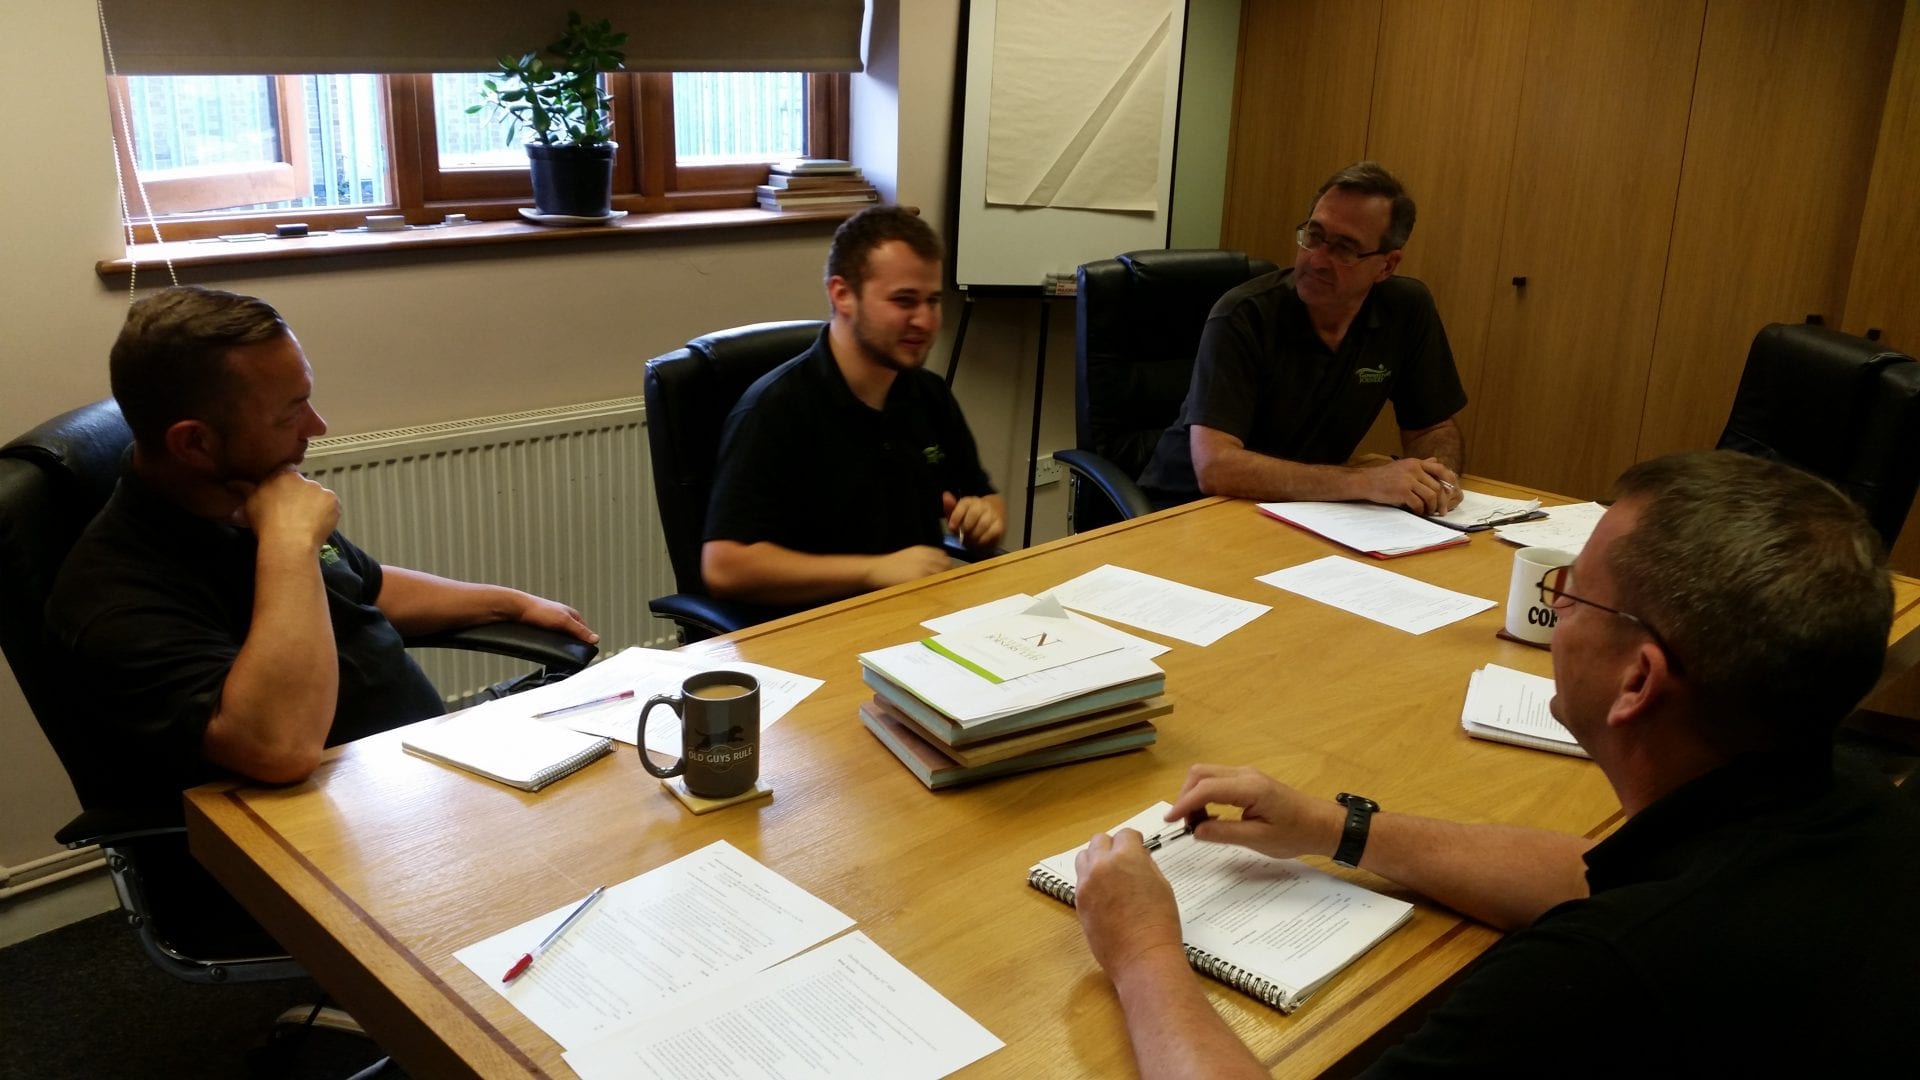 A quality and HS meeting in progress at the Gowercroft window manufacturer offices